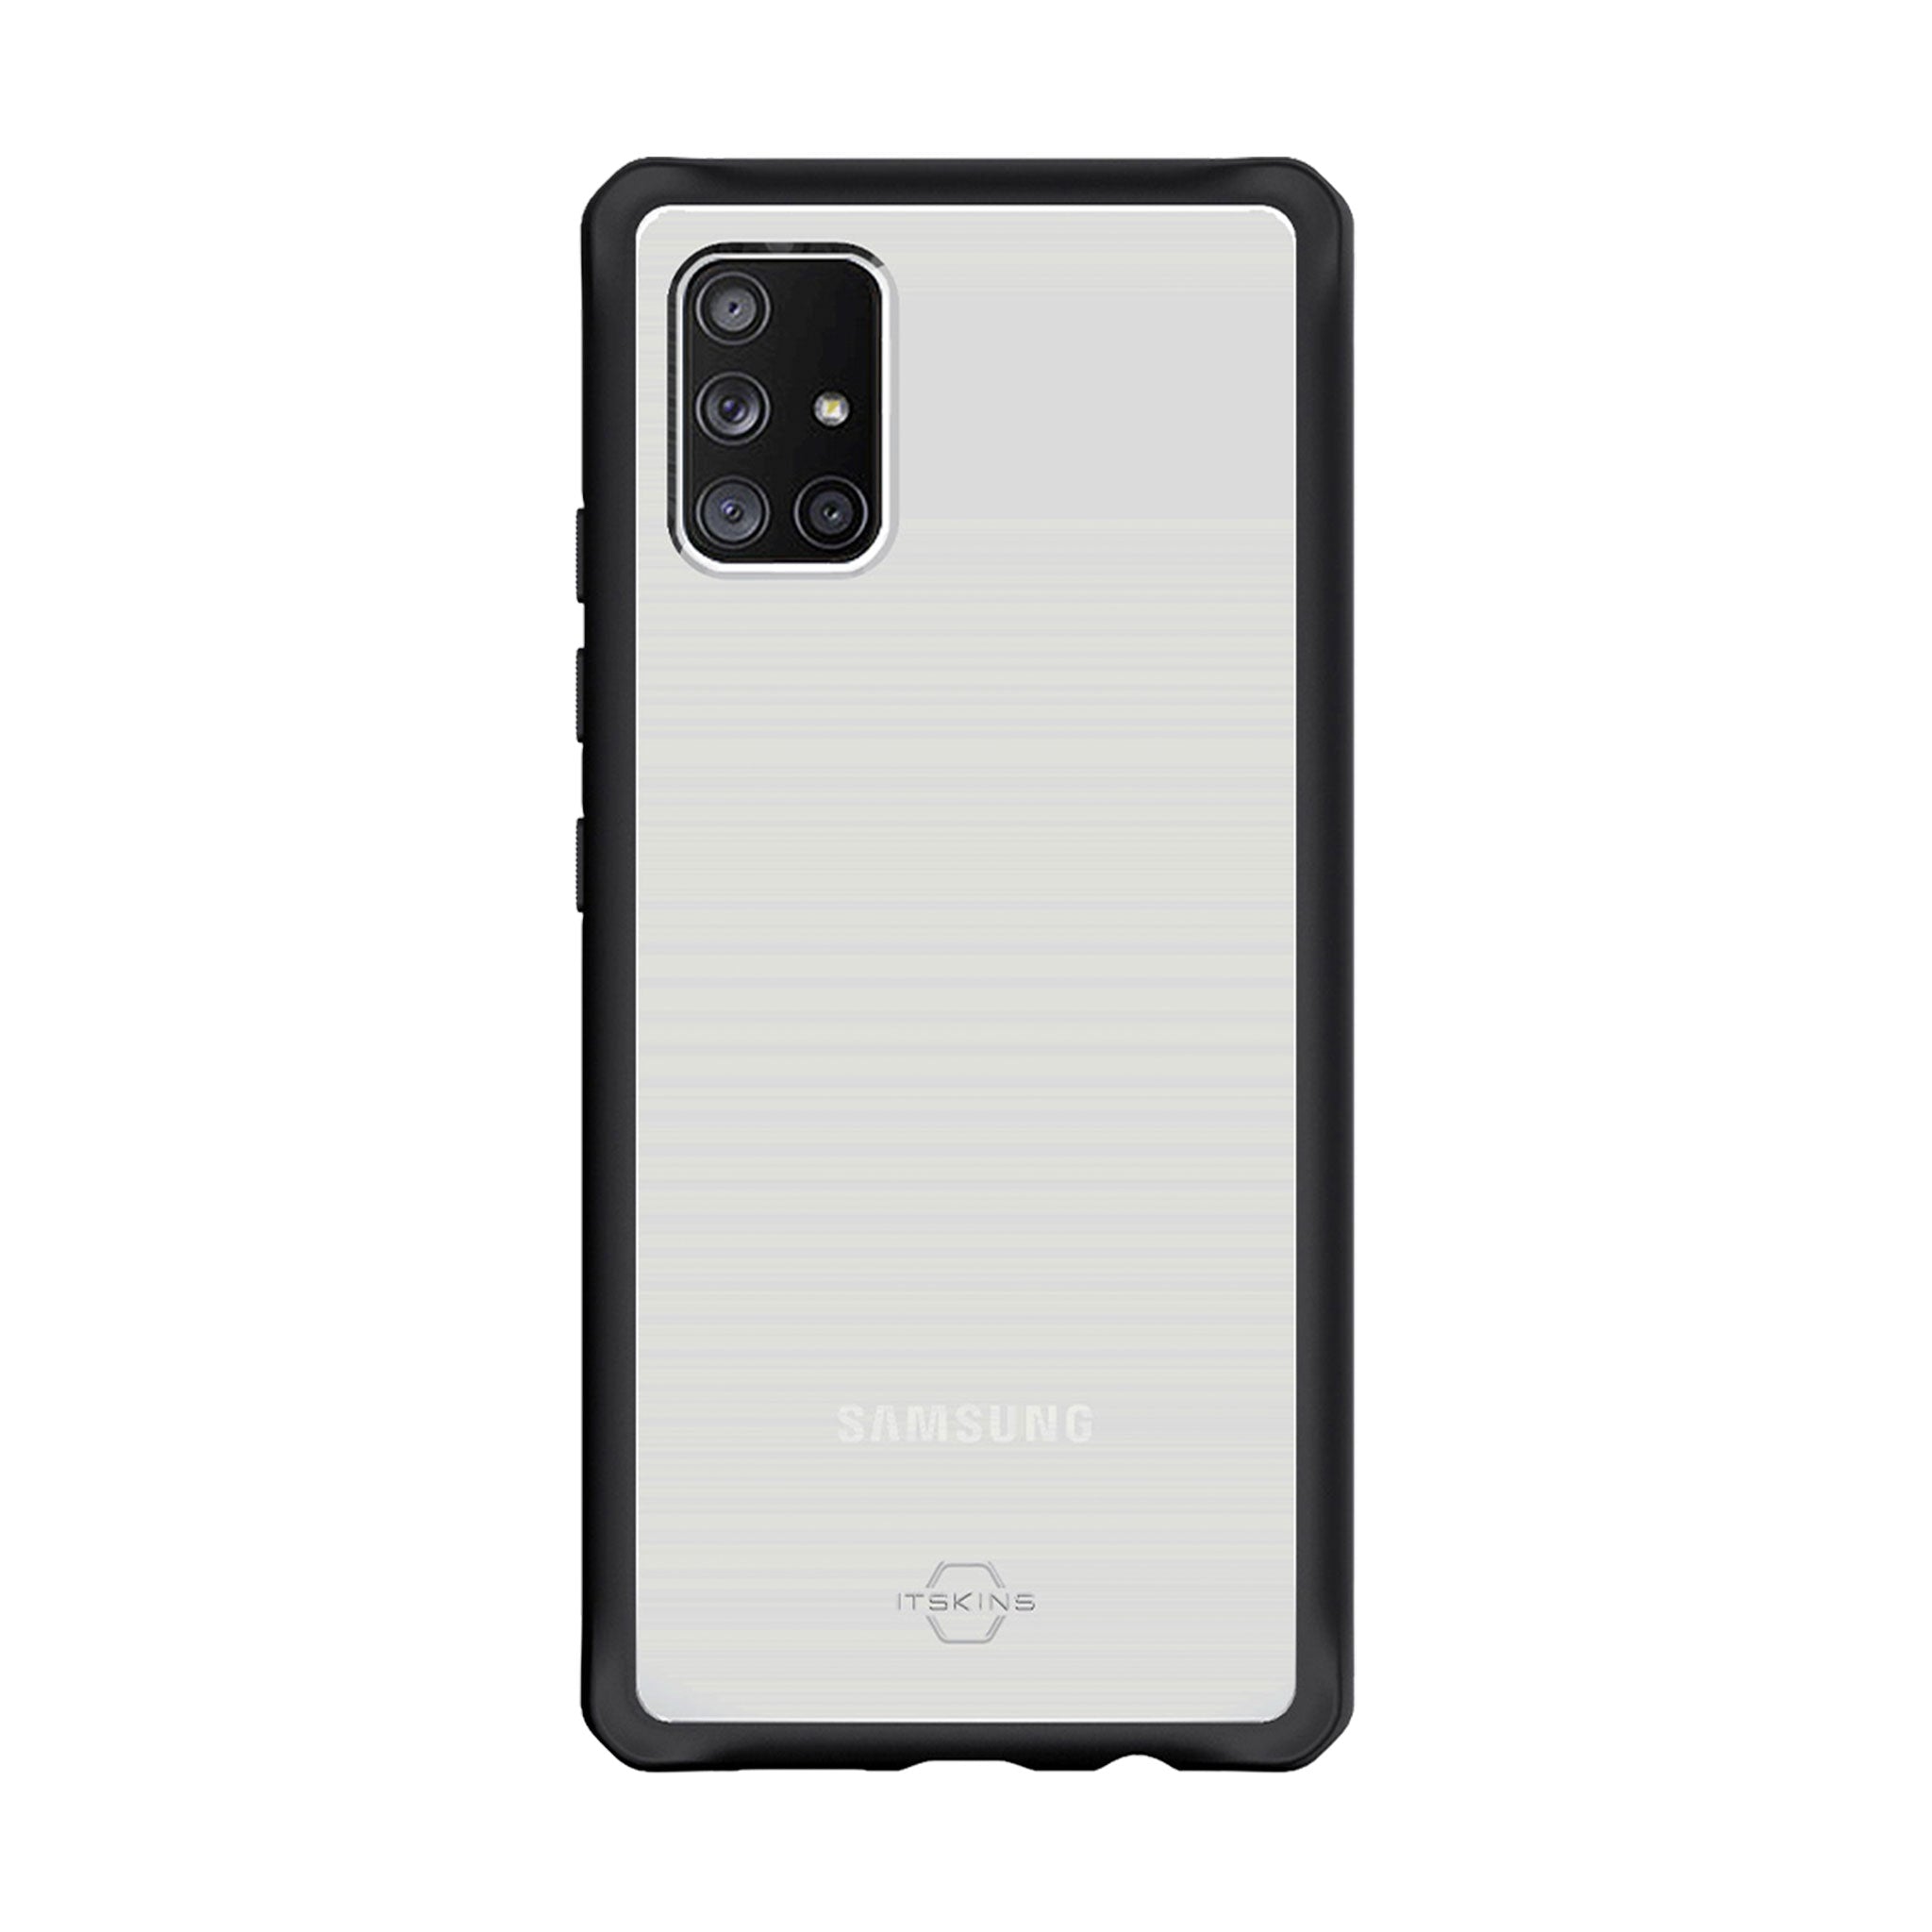 Itskins - Hybrid Solid Case For Samsung Galaxy A71 5g - Black And Transparent